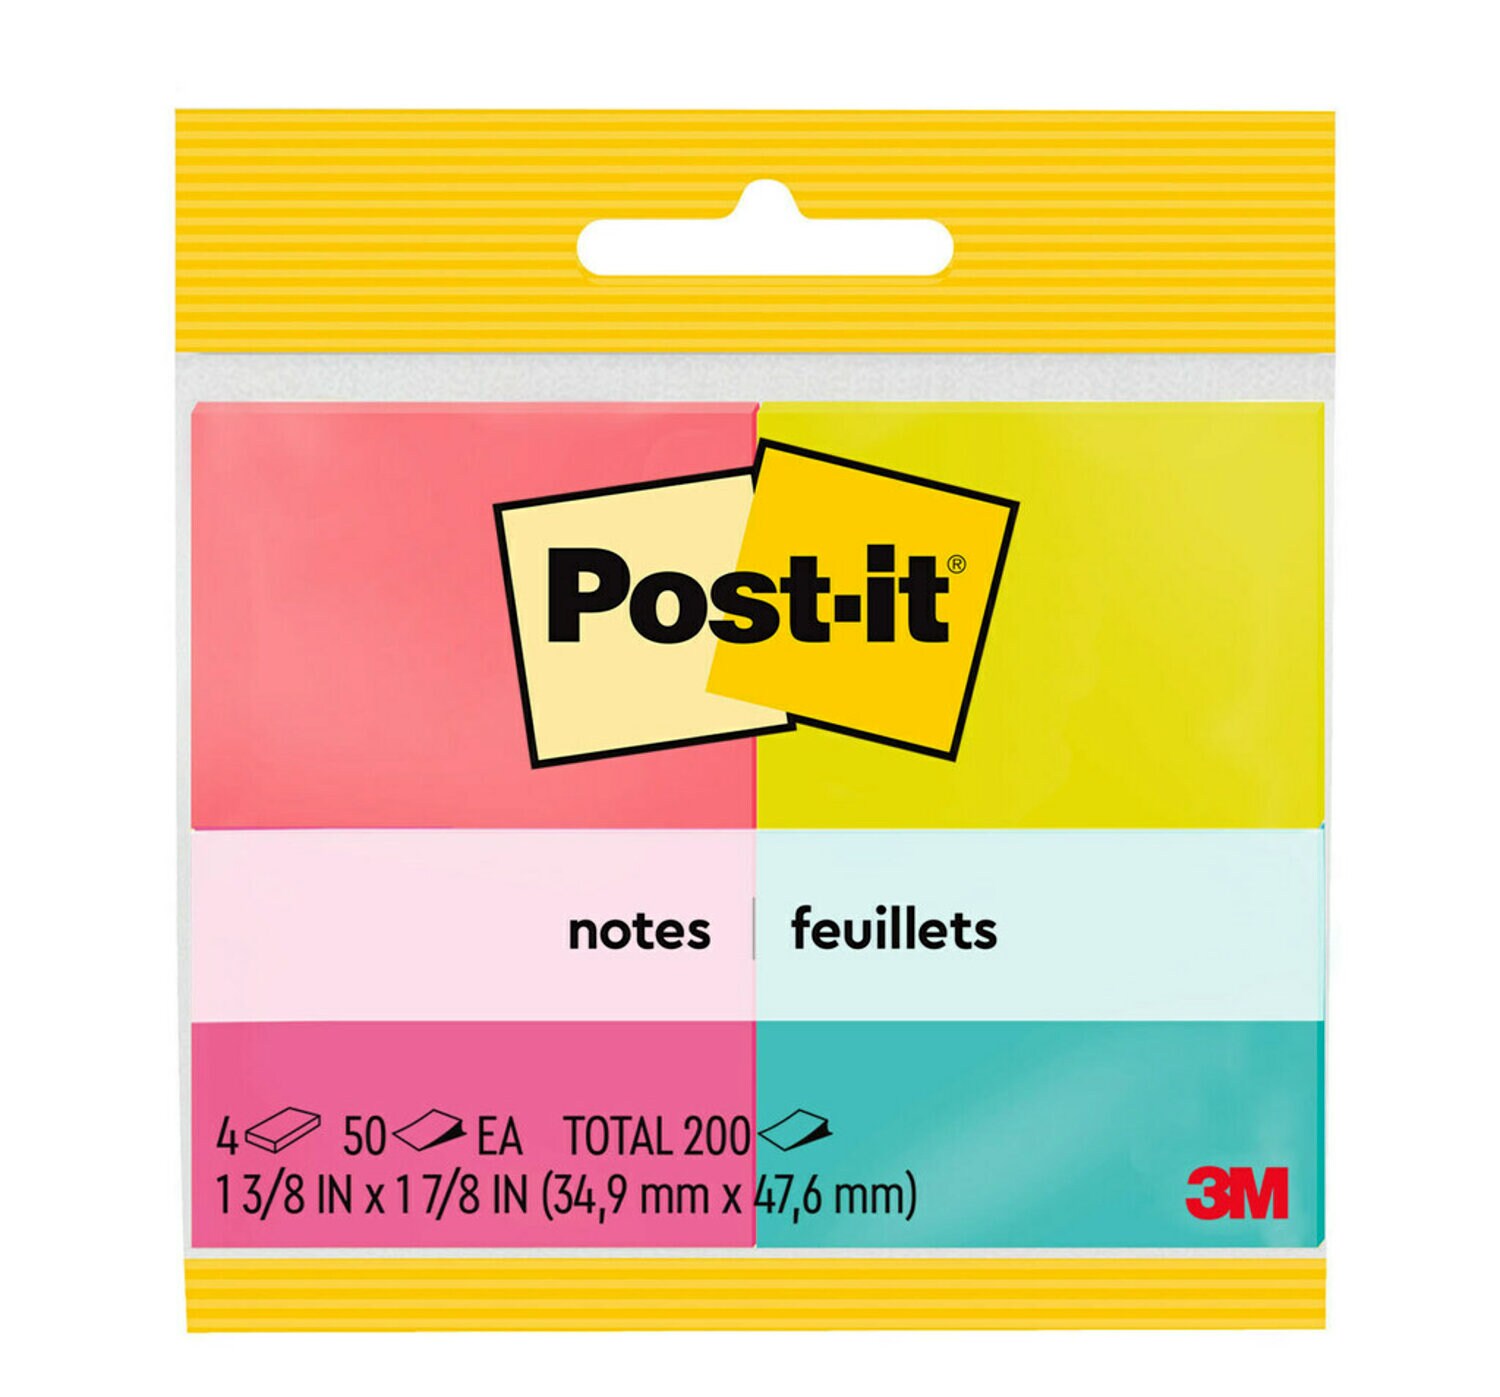 7100243050 - Post-it Notes 653-4-N, 1 3/8 in x 1 7/8 in (34,9 mm x 47,6 mm)